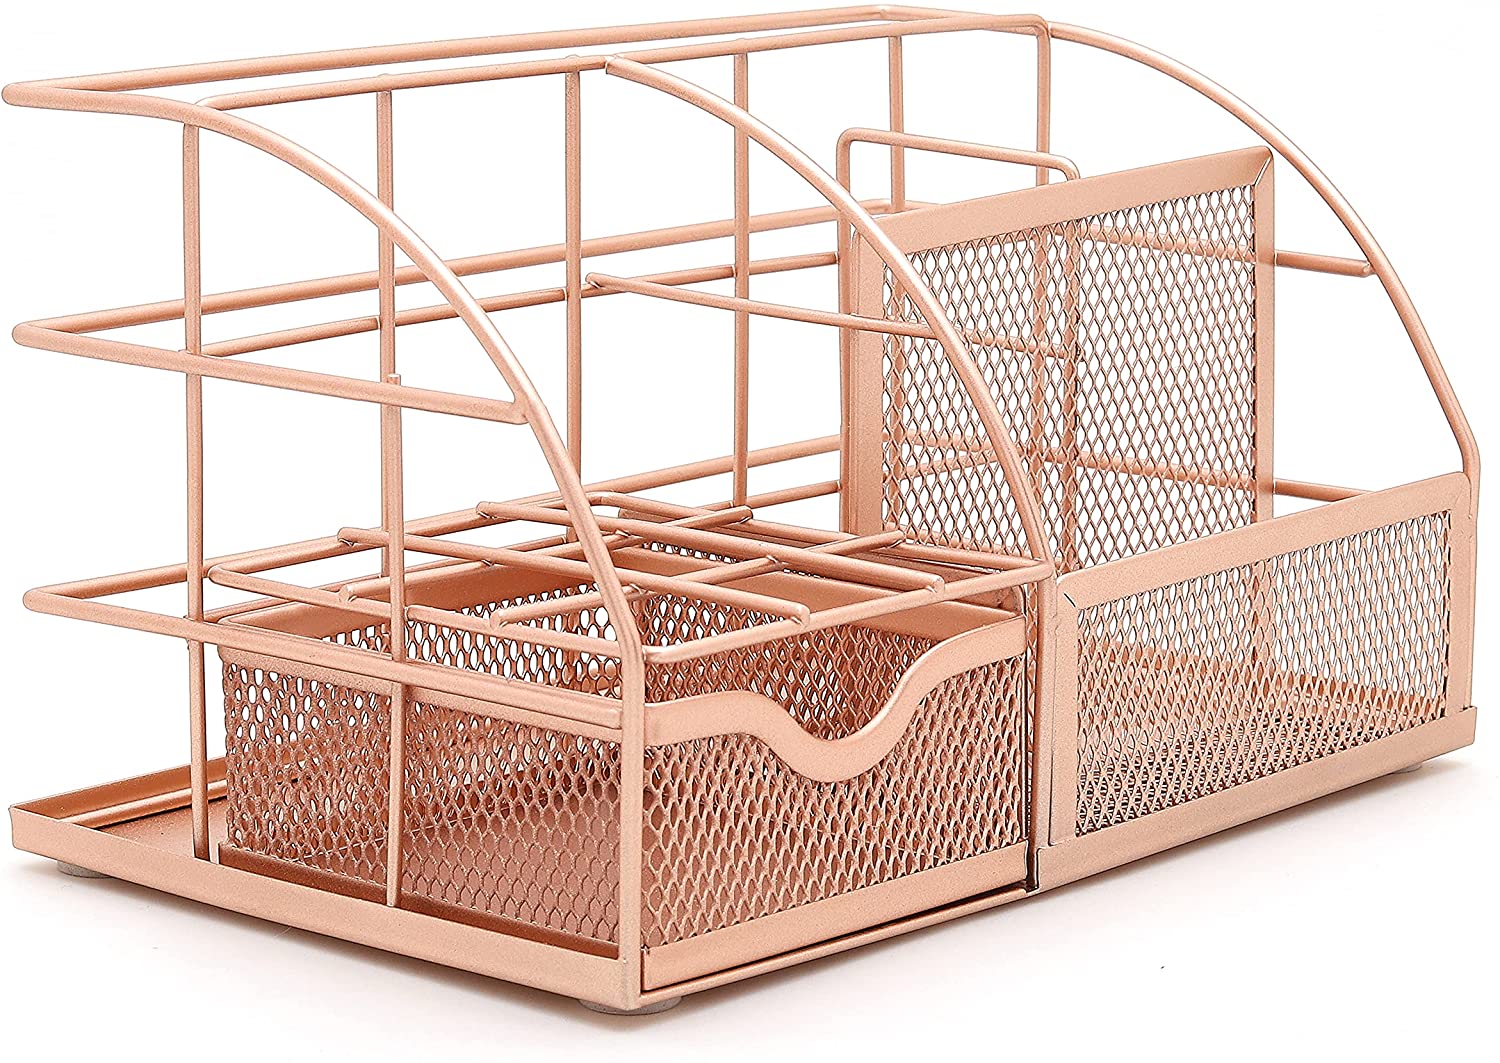 EXERZ Desk Organiser with 7 Compartments -Mesh Desk Tidy Caddy - Rose Gold